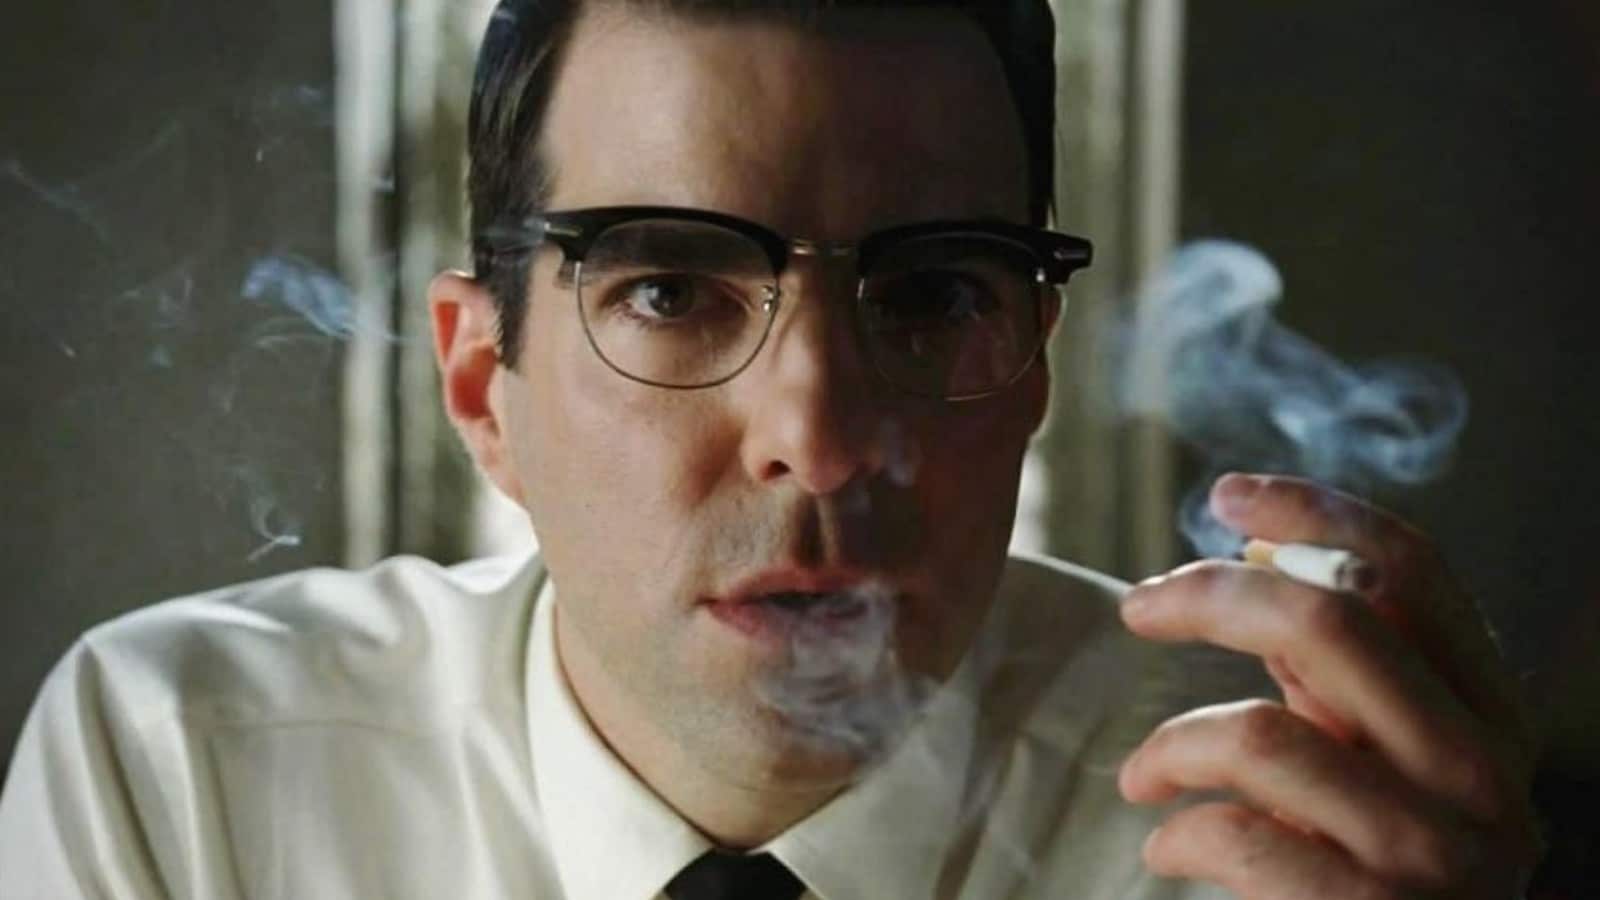 Zachary Quinto in AHS, who's returning in the American Horror Story Season 11 cast